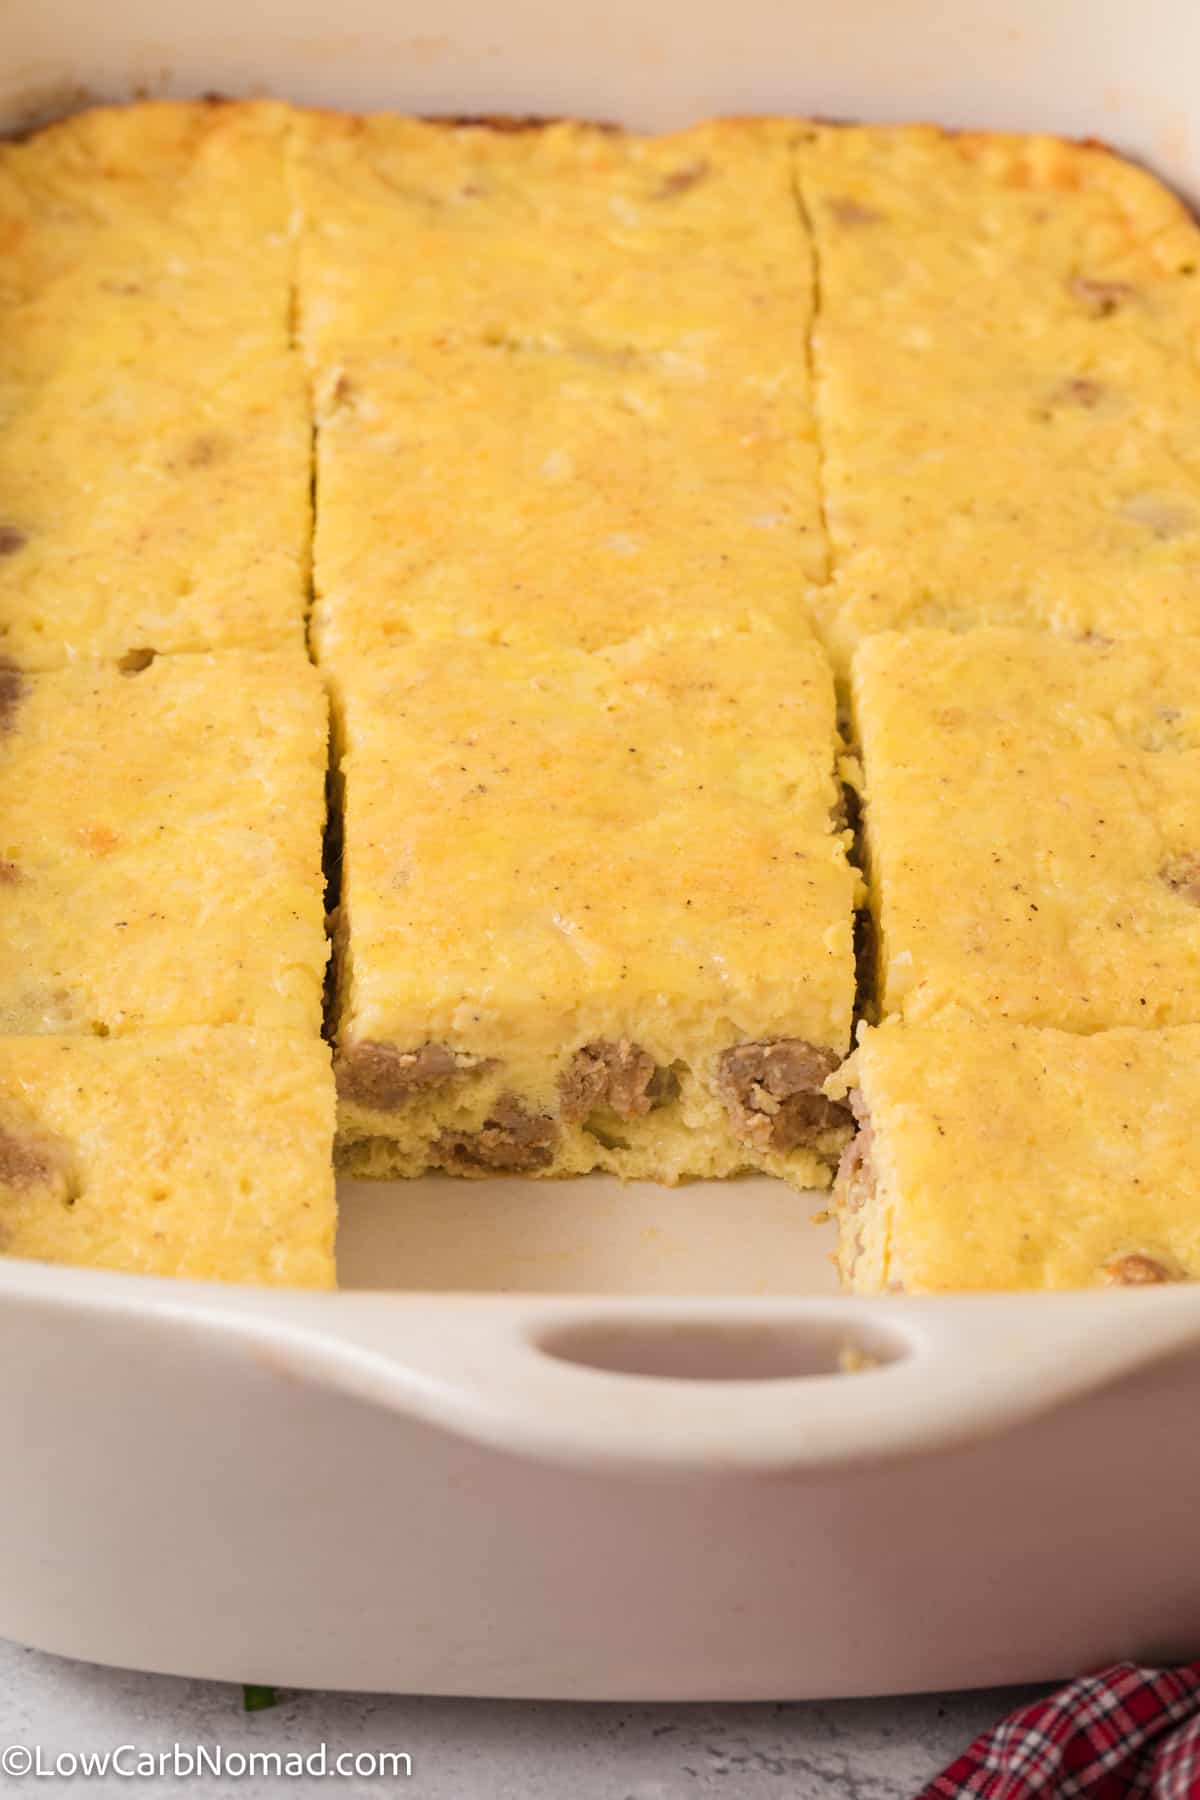 Sausage Egg and Cheese Breakfast Casserole in a casserole dish